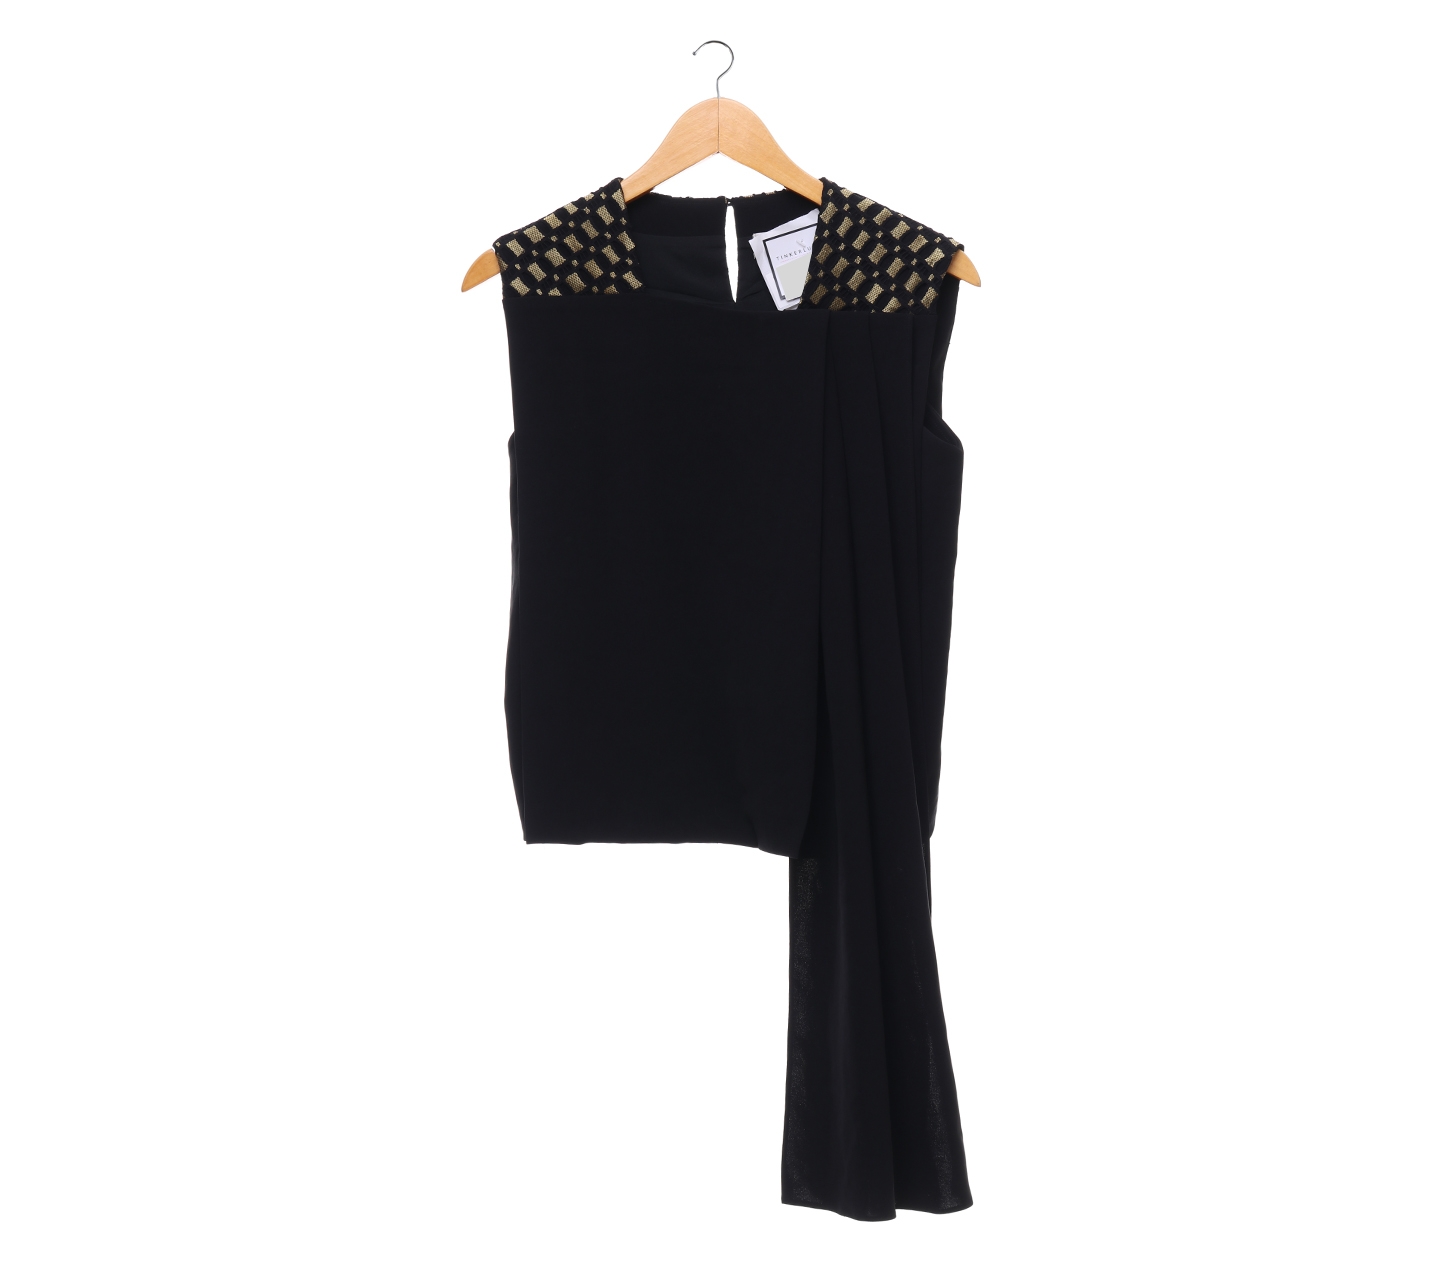 Bloom Black and Gold Sleeveless